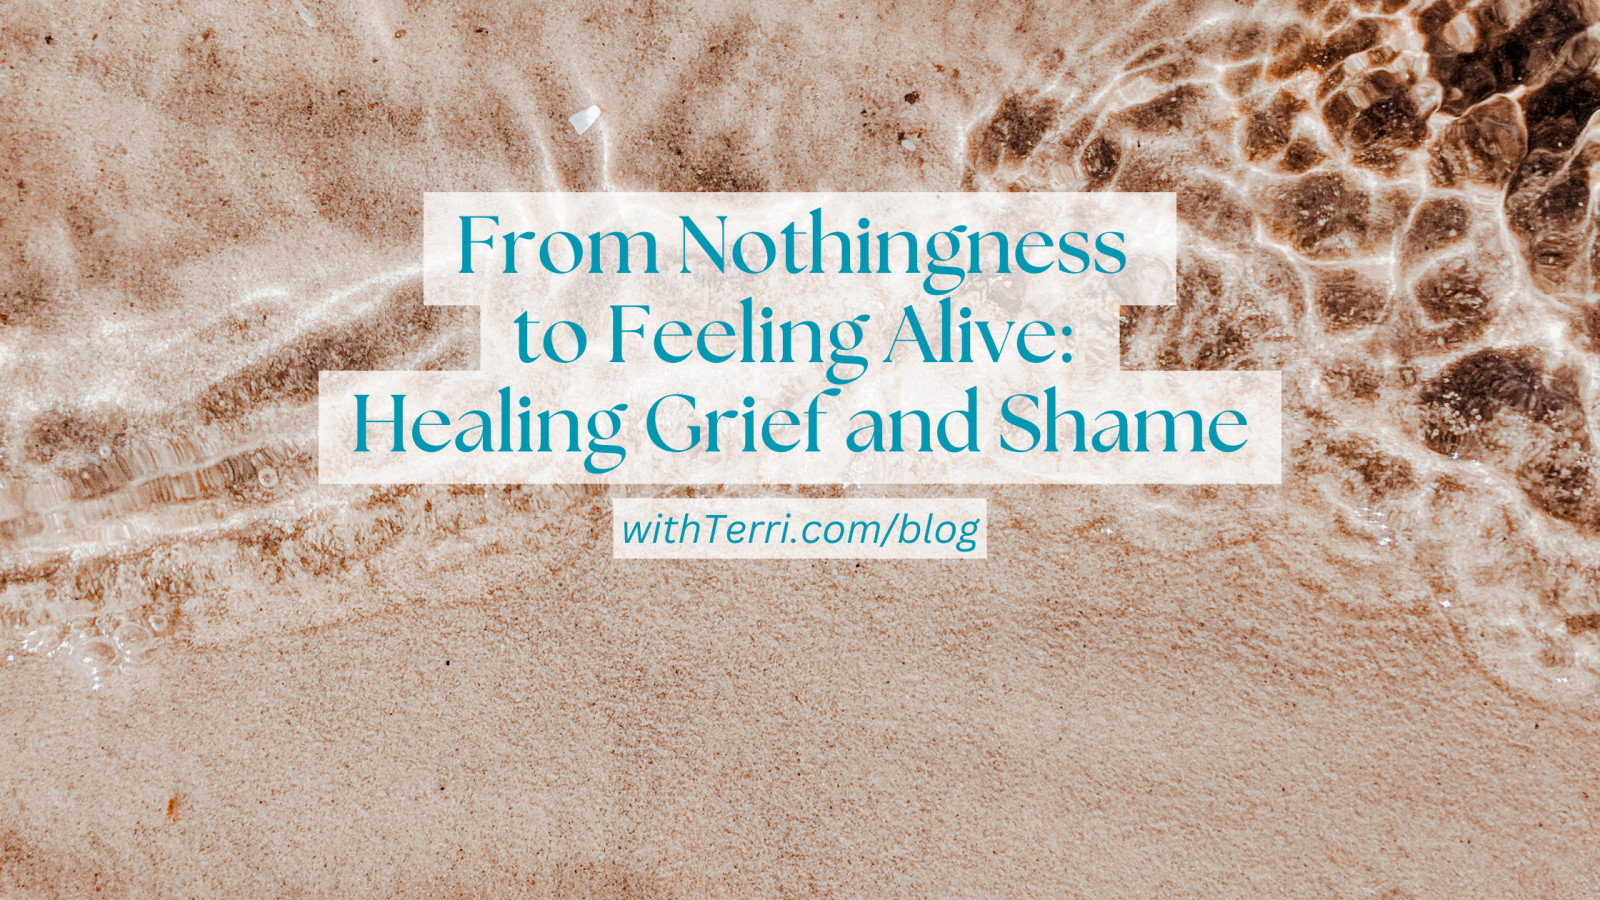 Part 1: From Nothingness to Feeling Alive: Healing Grief and Shame